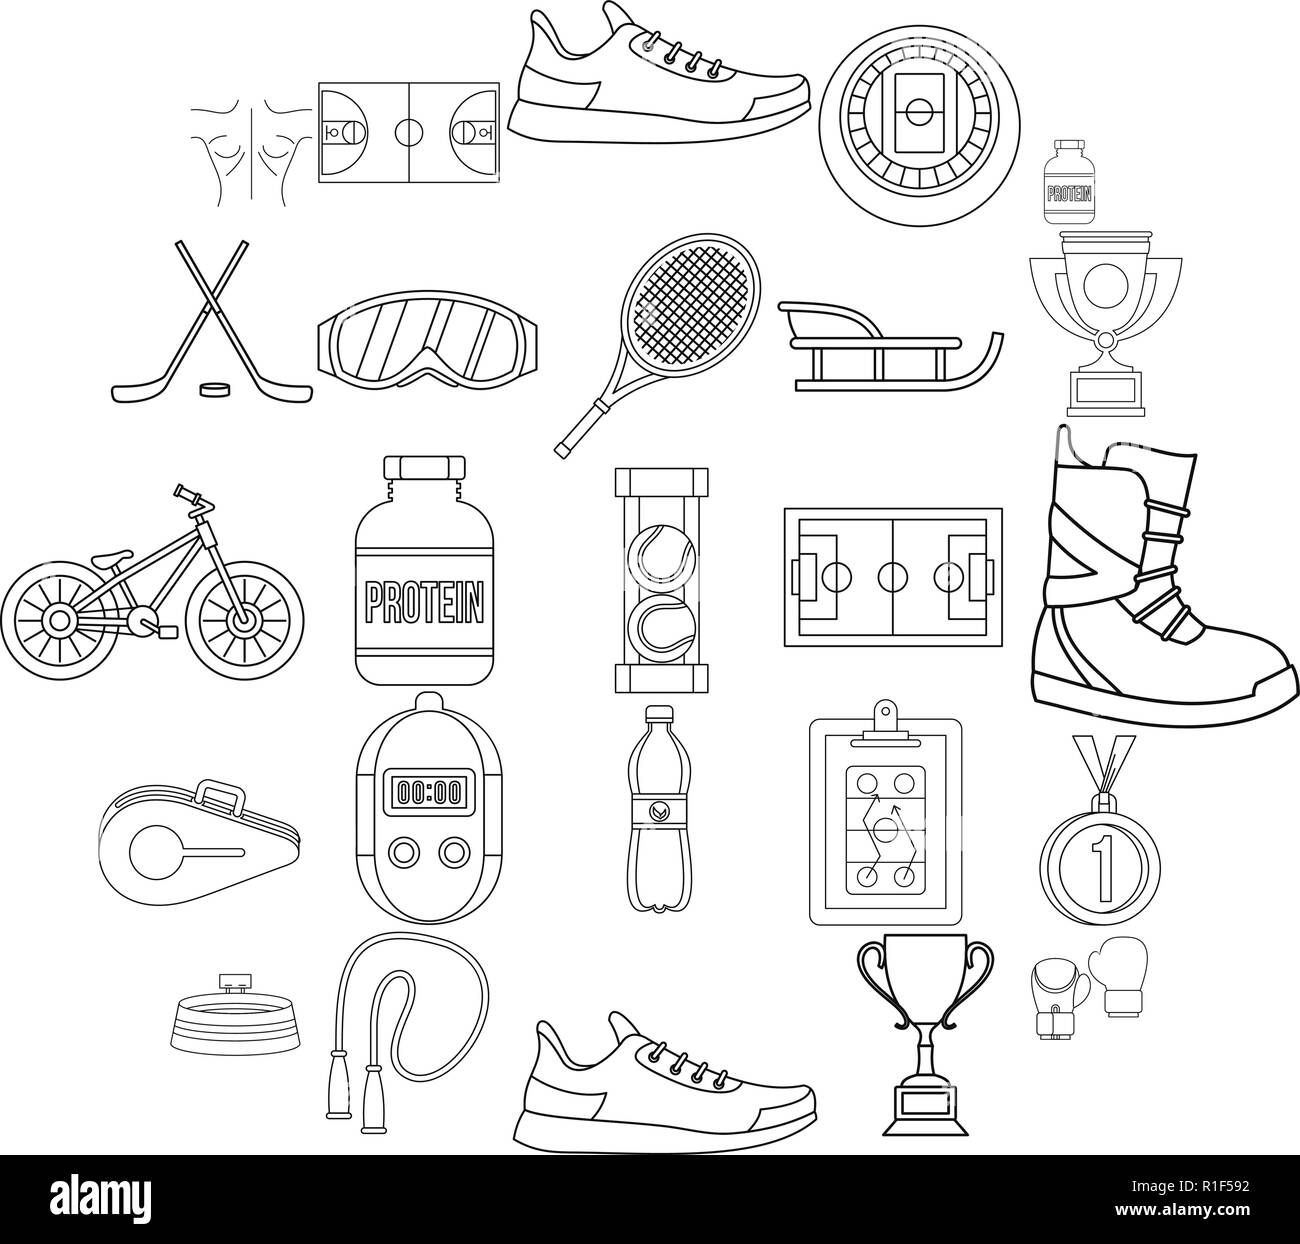 Hockey hall icons set, outline style Stock Vector